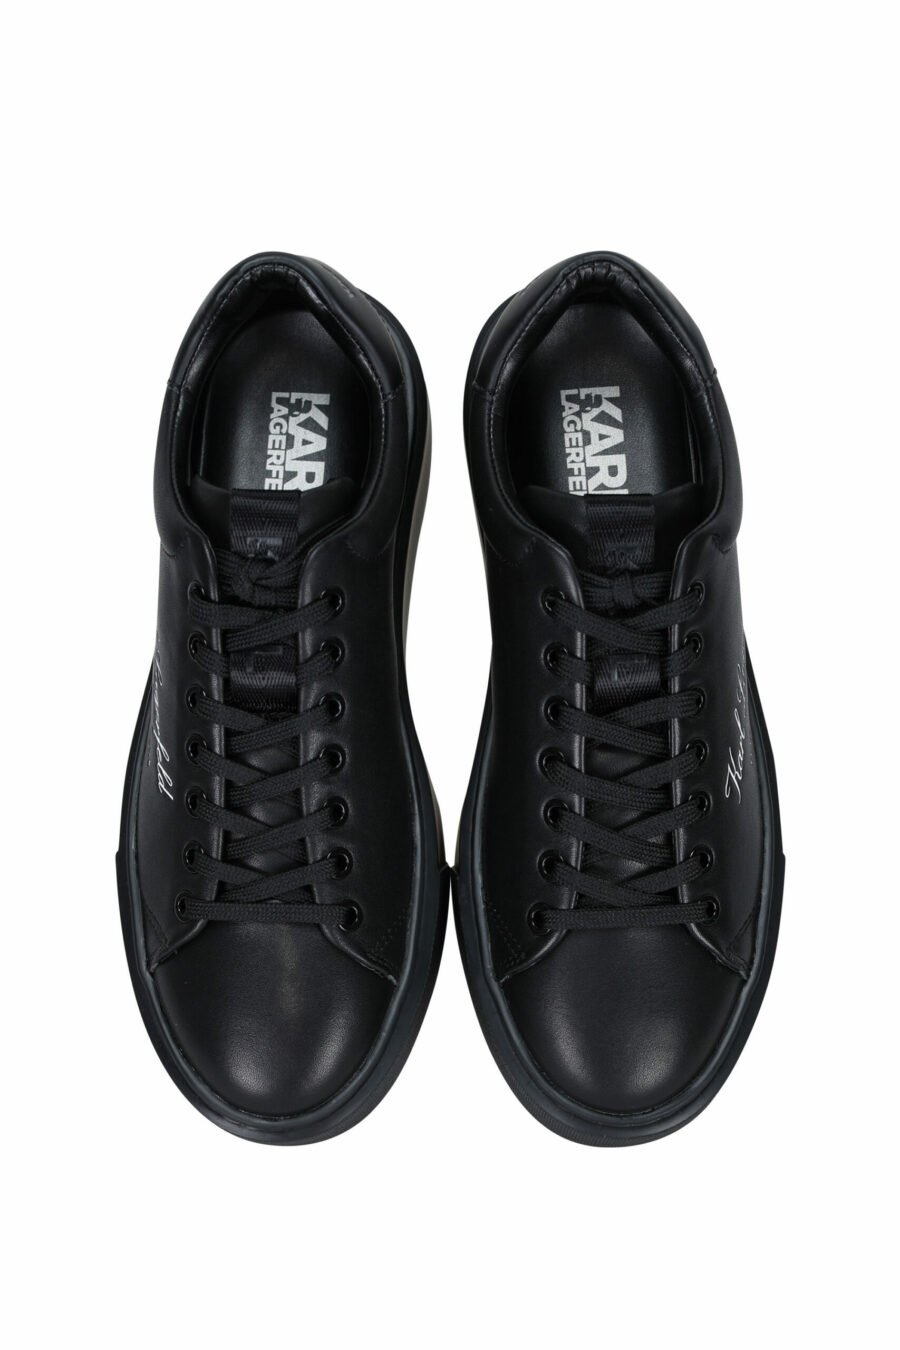 Black "maxi kup" trainers with white signature logo and black sole - 5059529325885 4 scaled